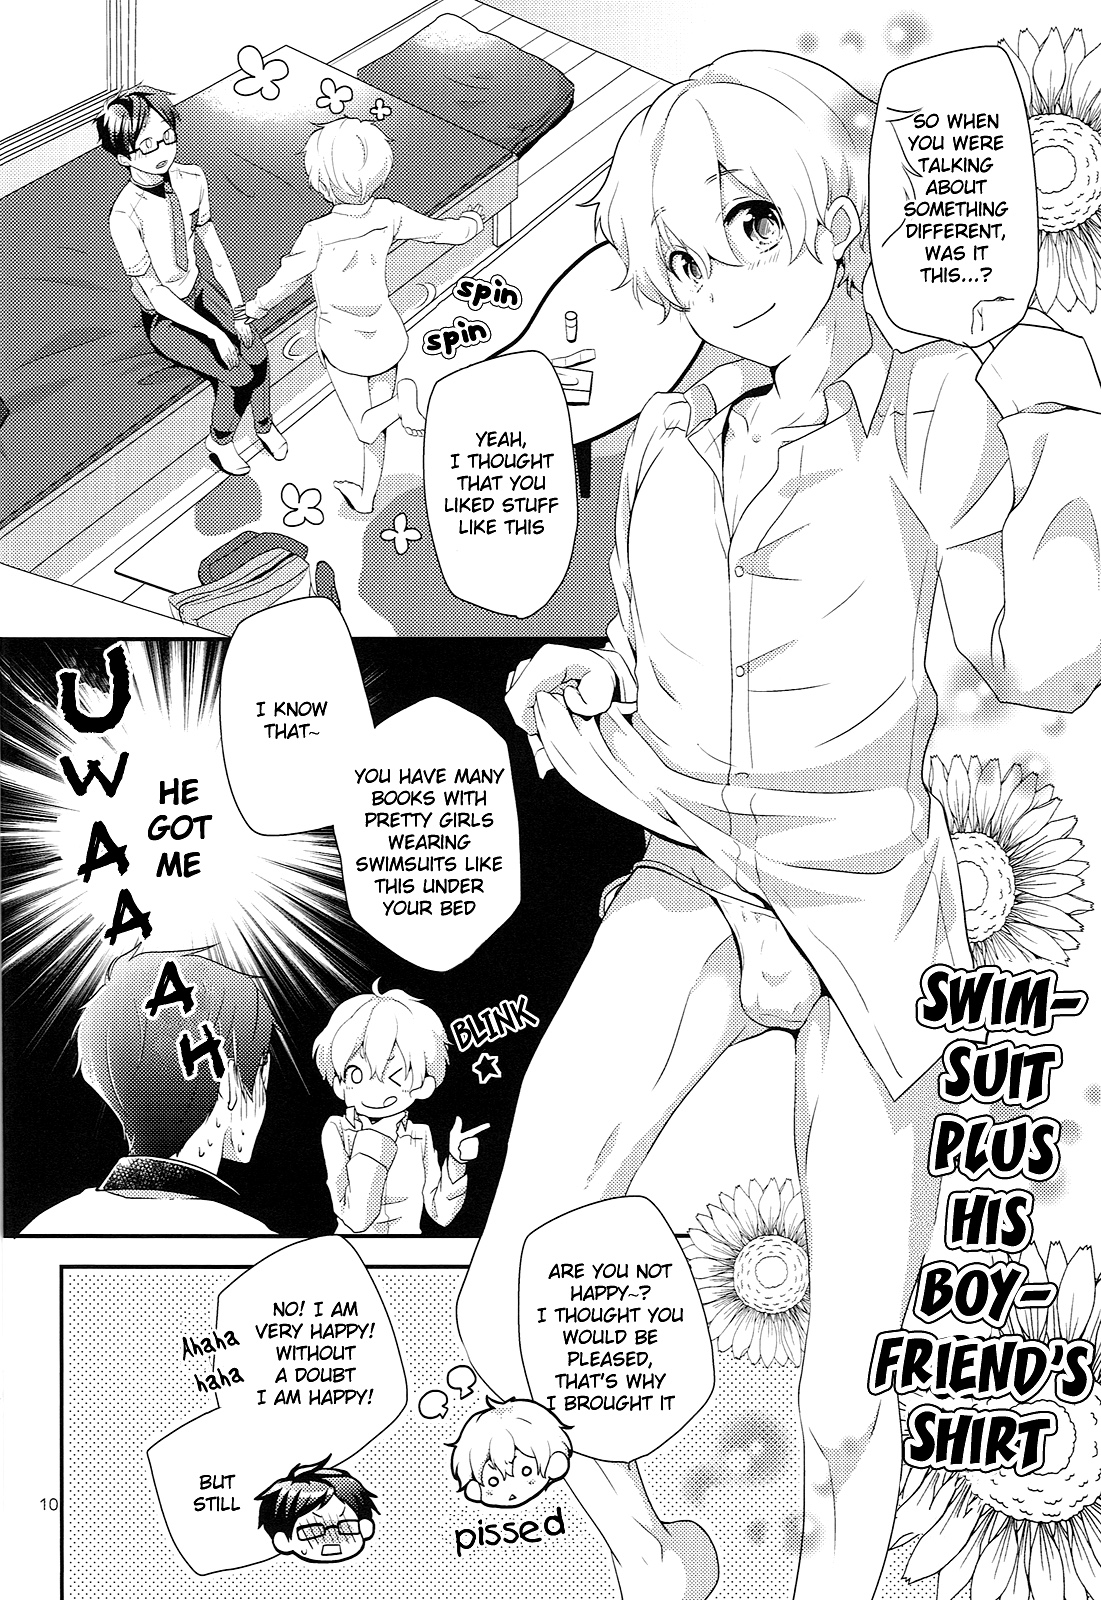 (SPARK9) [594x841 (A1)] LEVEL UP! (Free!) [English] [Holy Mackerel] page 9 full